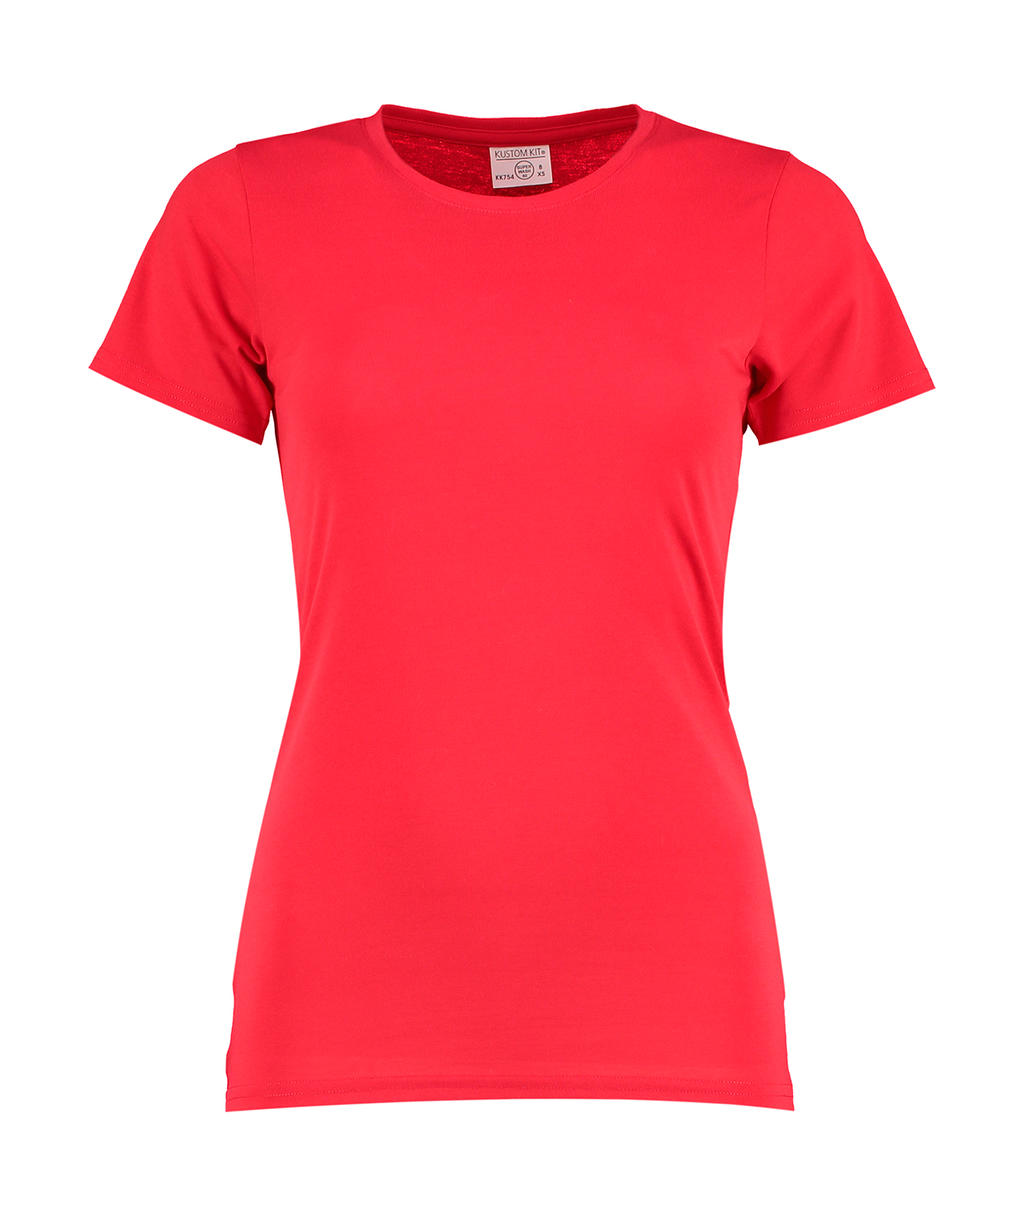  Womens Fashion Fit Superwash? 60? Tee in Farbe Red